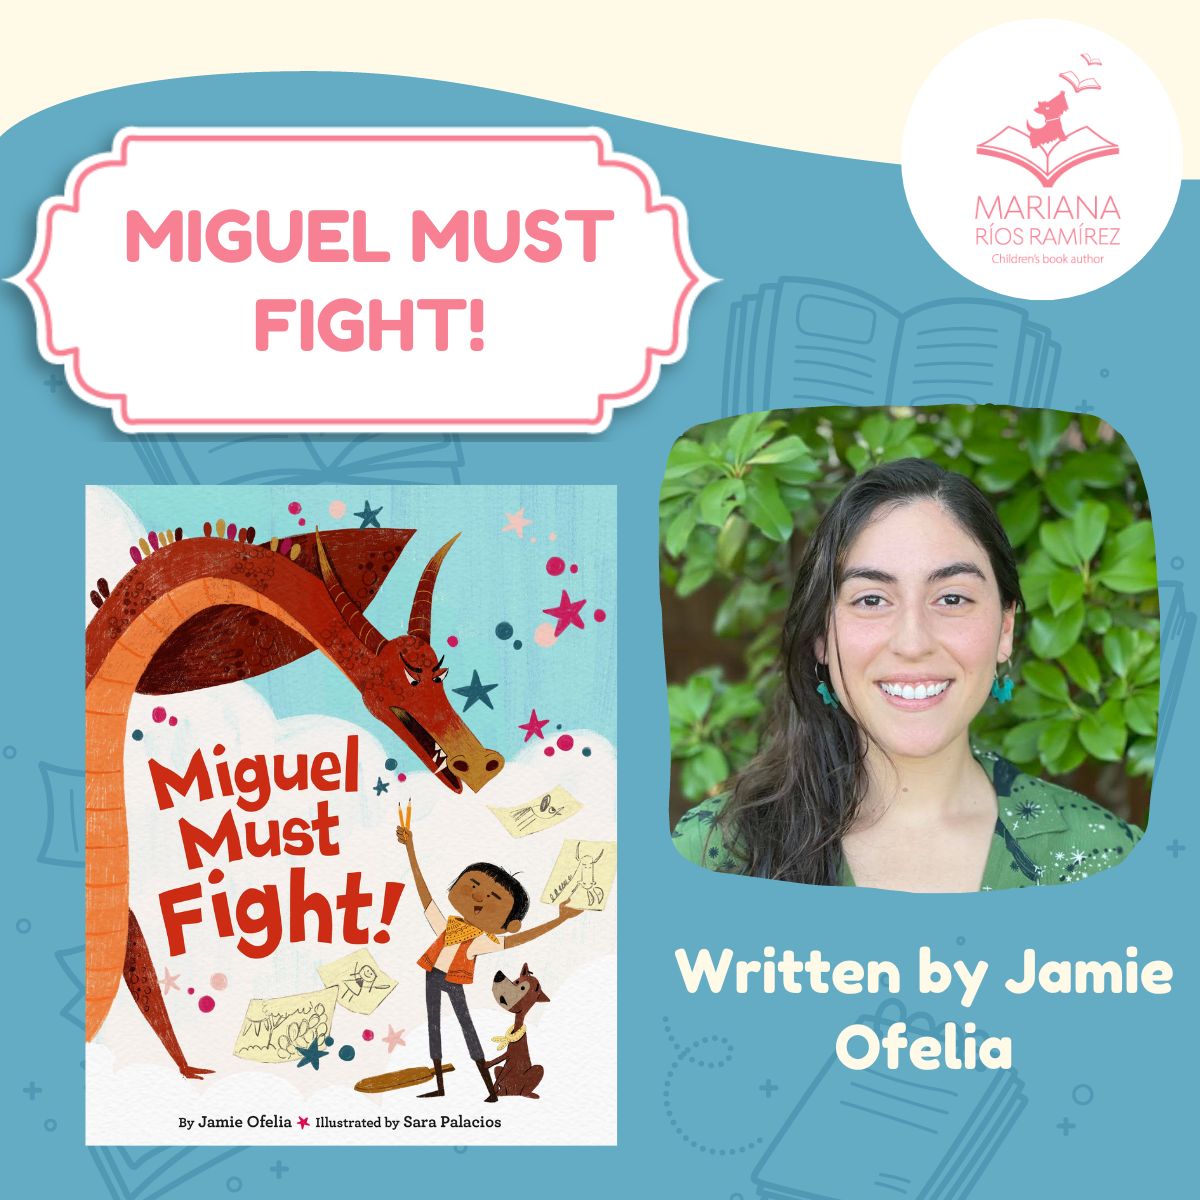 I'm thrilled to share this interview with my critique partner, friend, and fellow Musa @JamieOfelia about her soon to be published picture book MIGUEL MUST FIGHT!

Check it out here: 🐲🧡

marianariosramirez.com/miguel-must-fi… 

#kidlit #pb #picturebooks #writingcommunity #lasmusasbooks